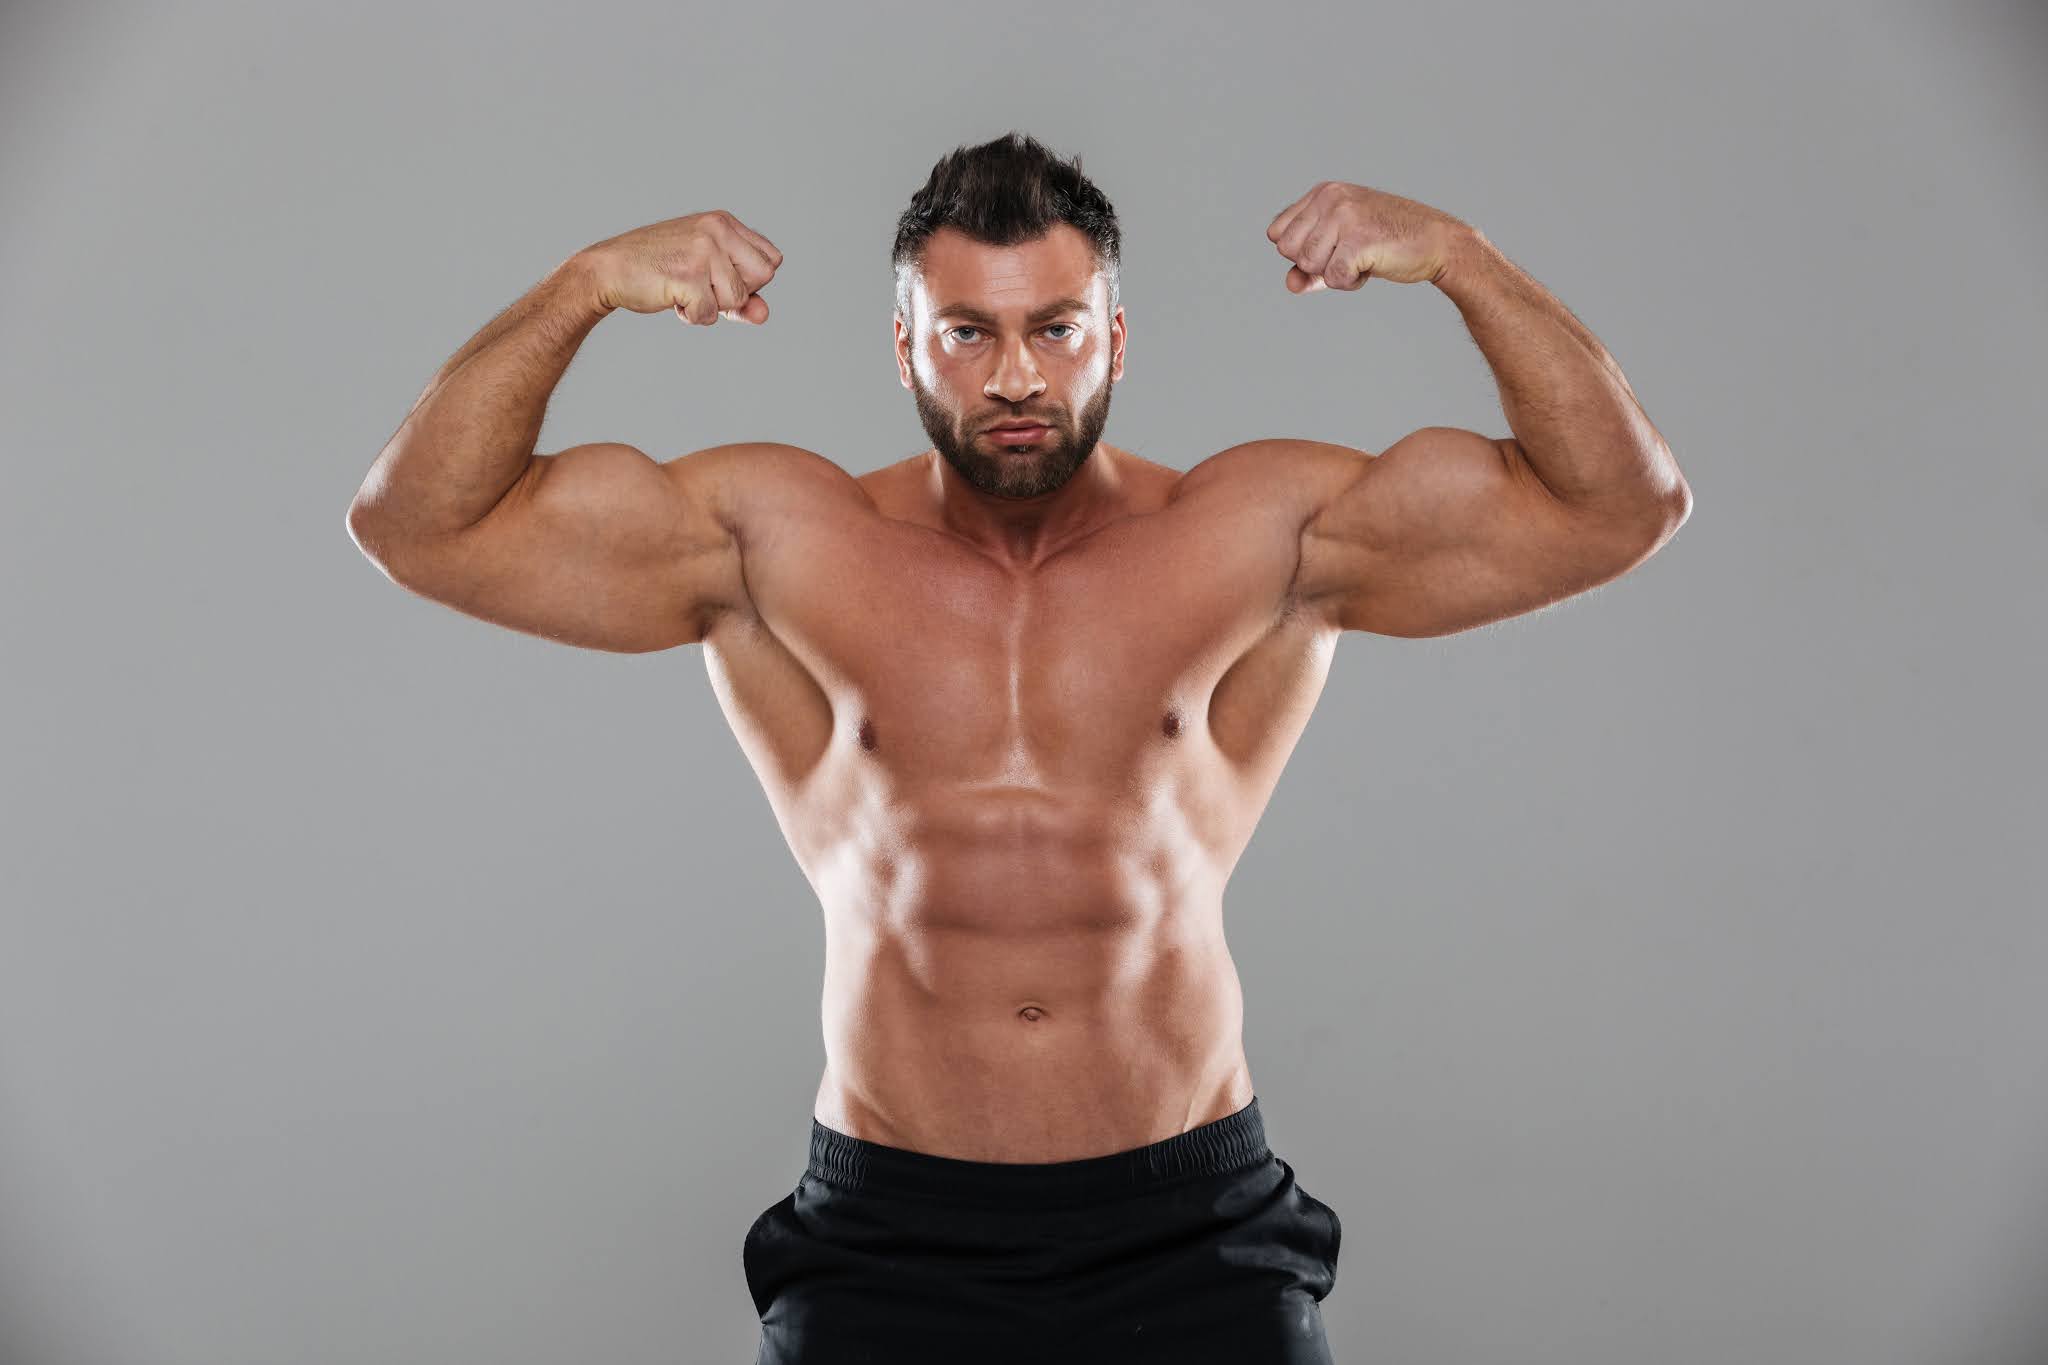 How to get big arm muscles at home full workout plan